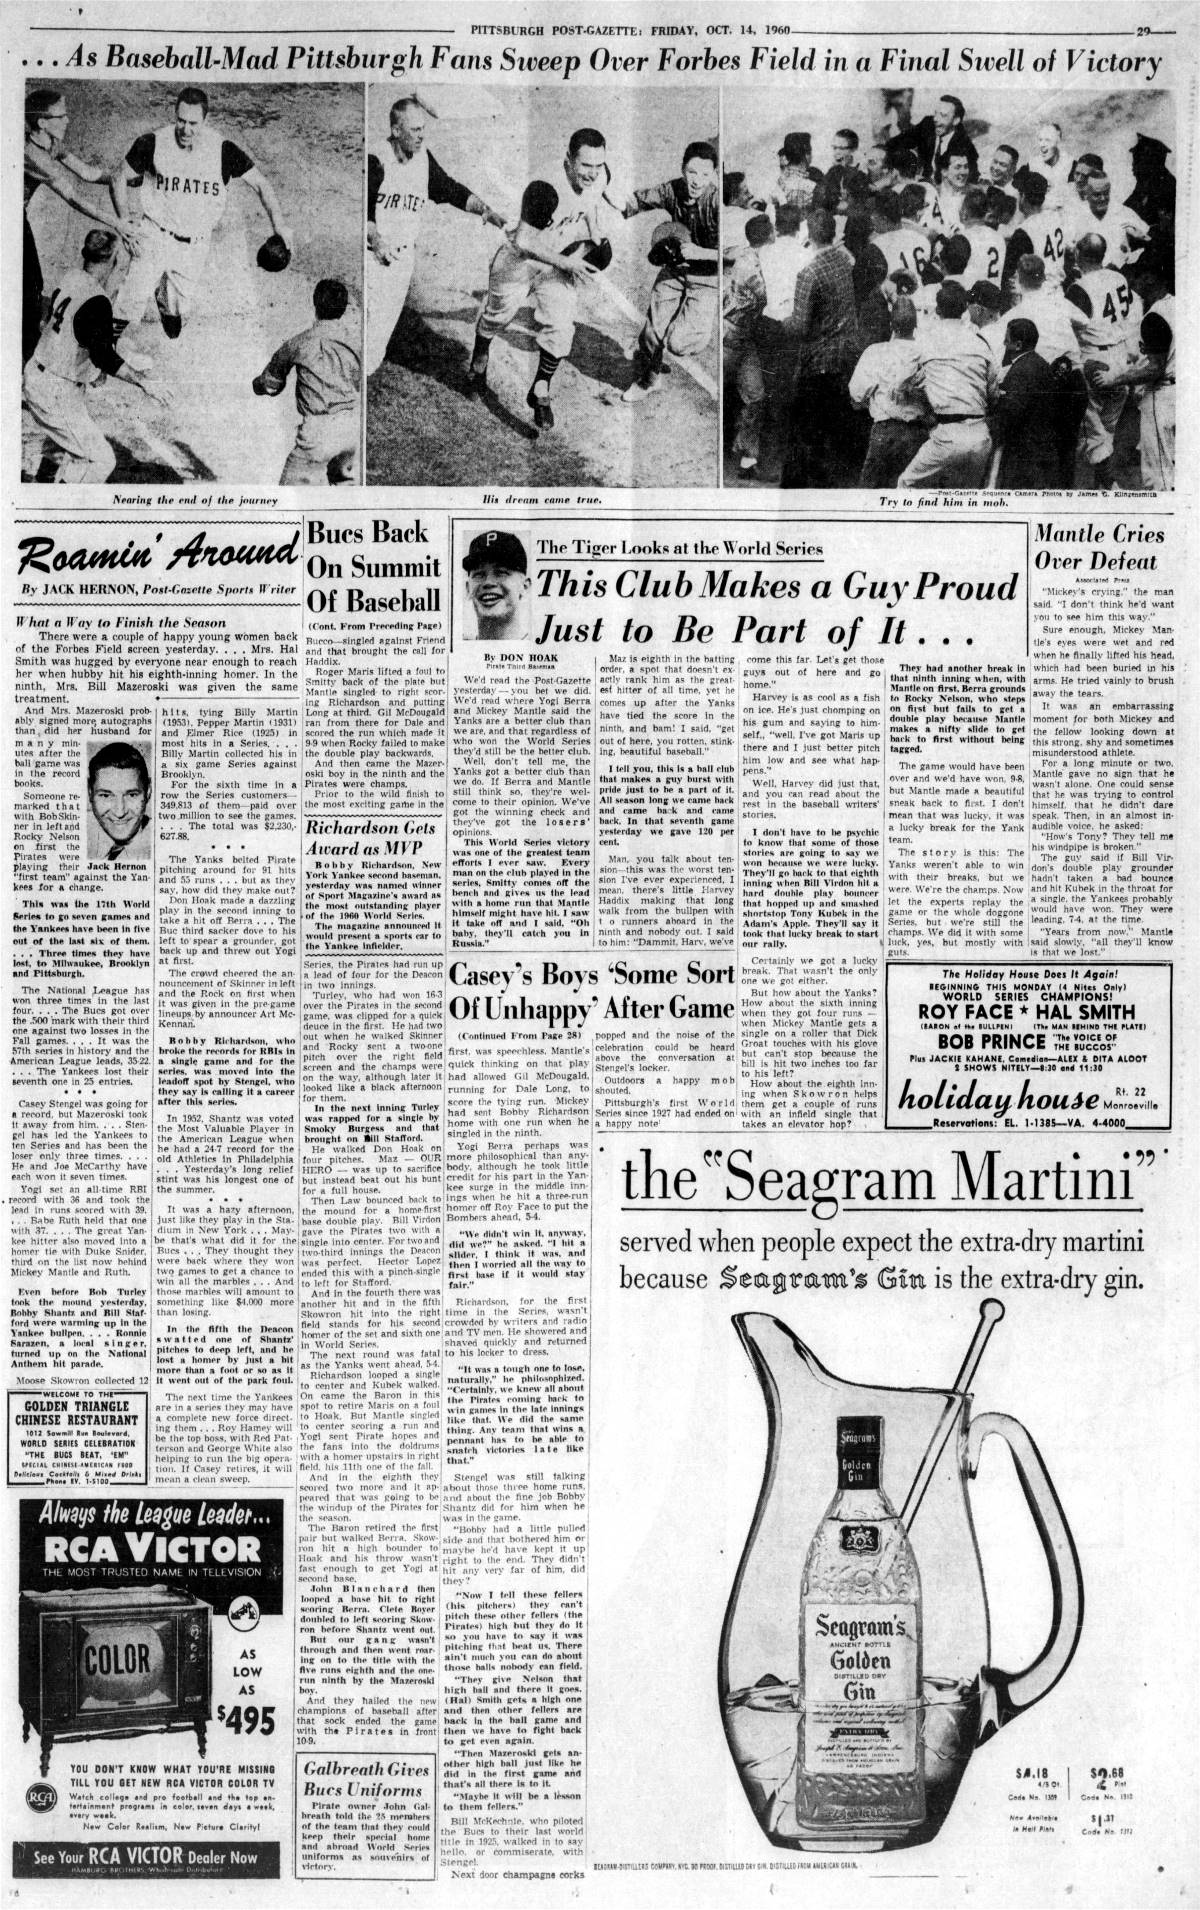 PG sports page - October 14, 1960